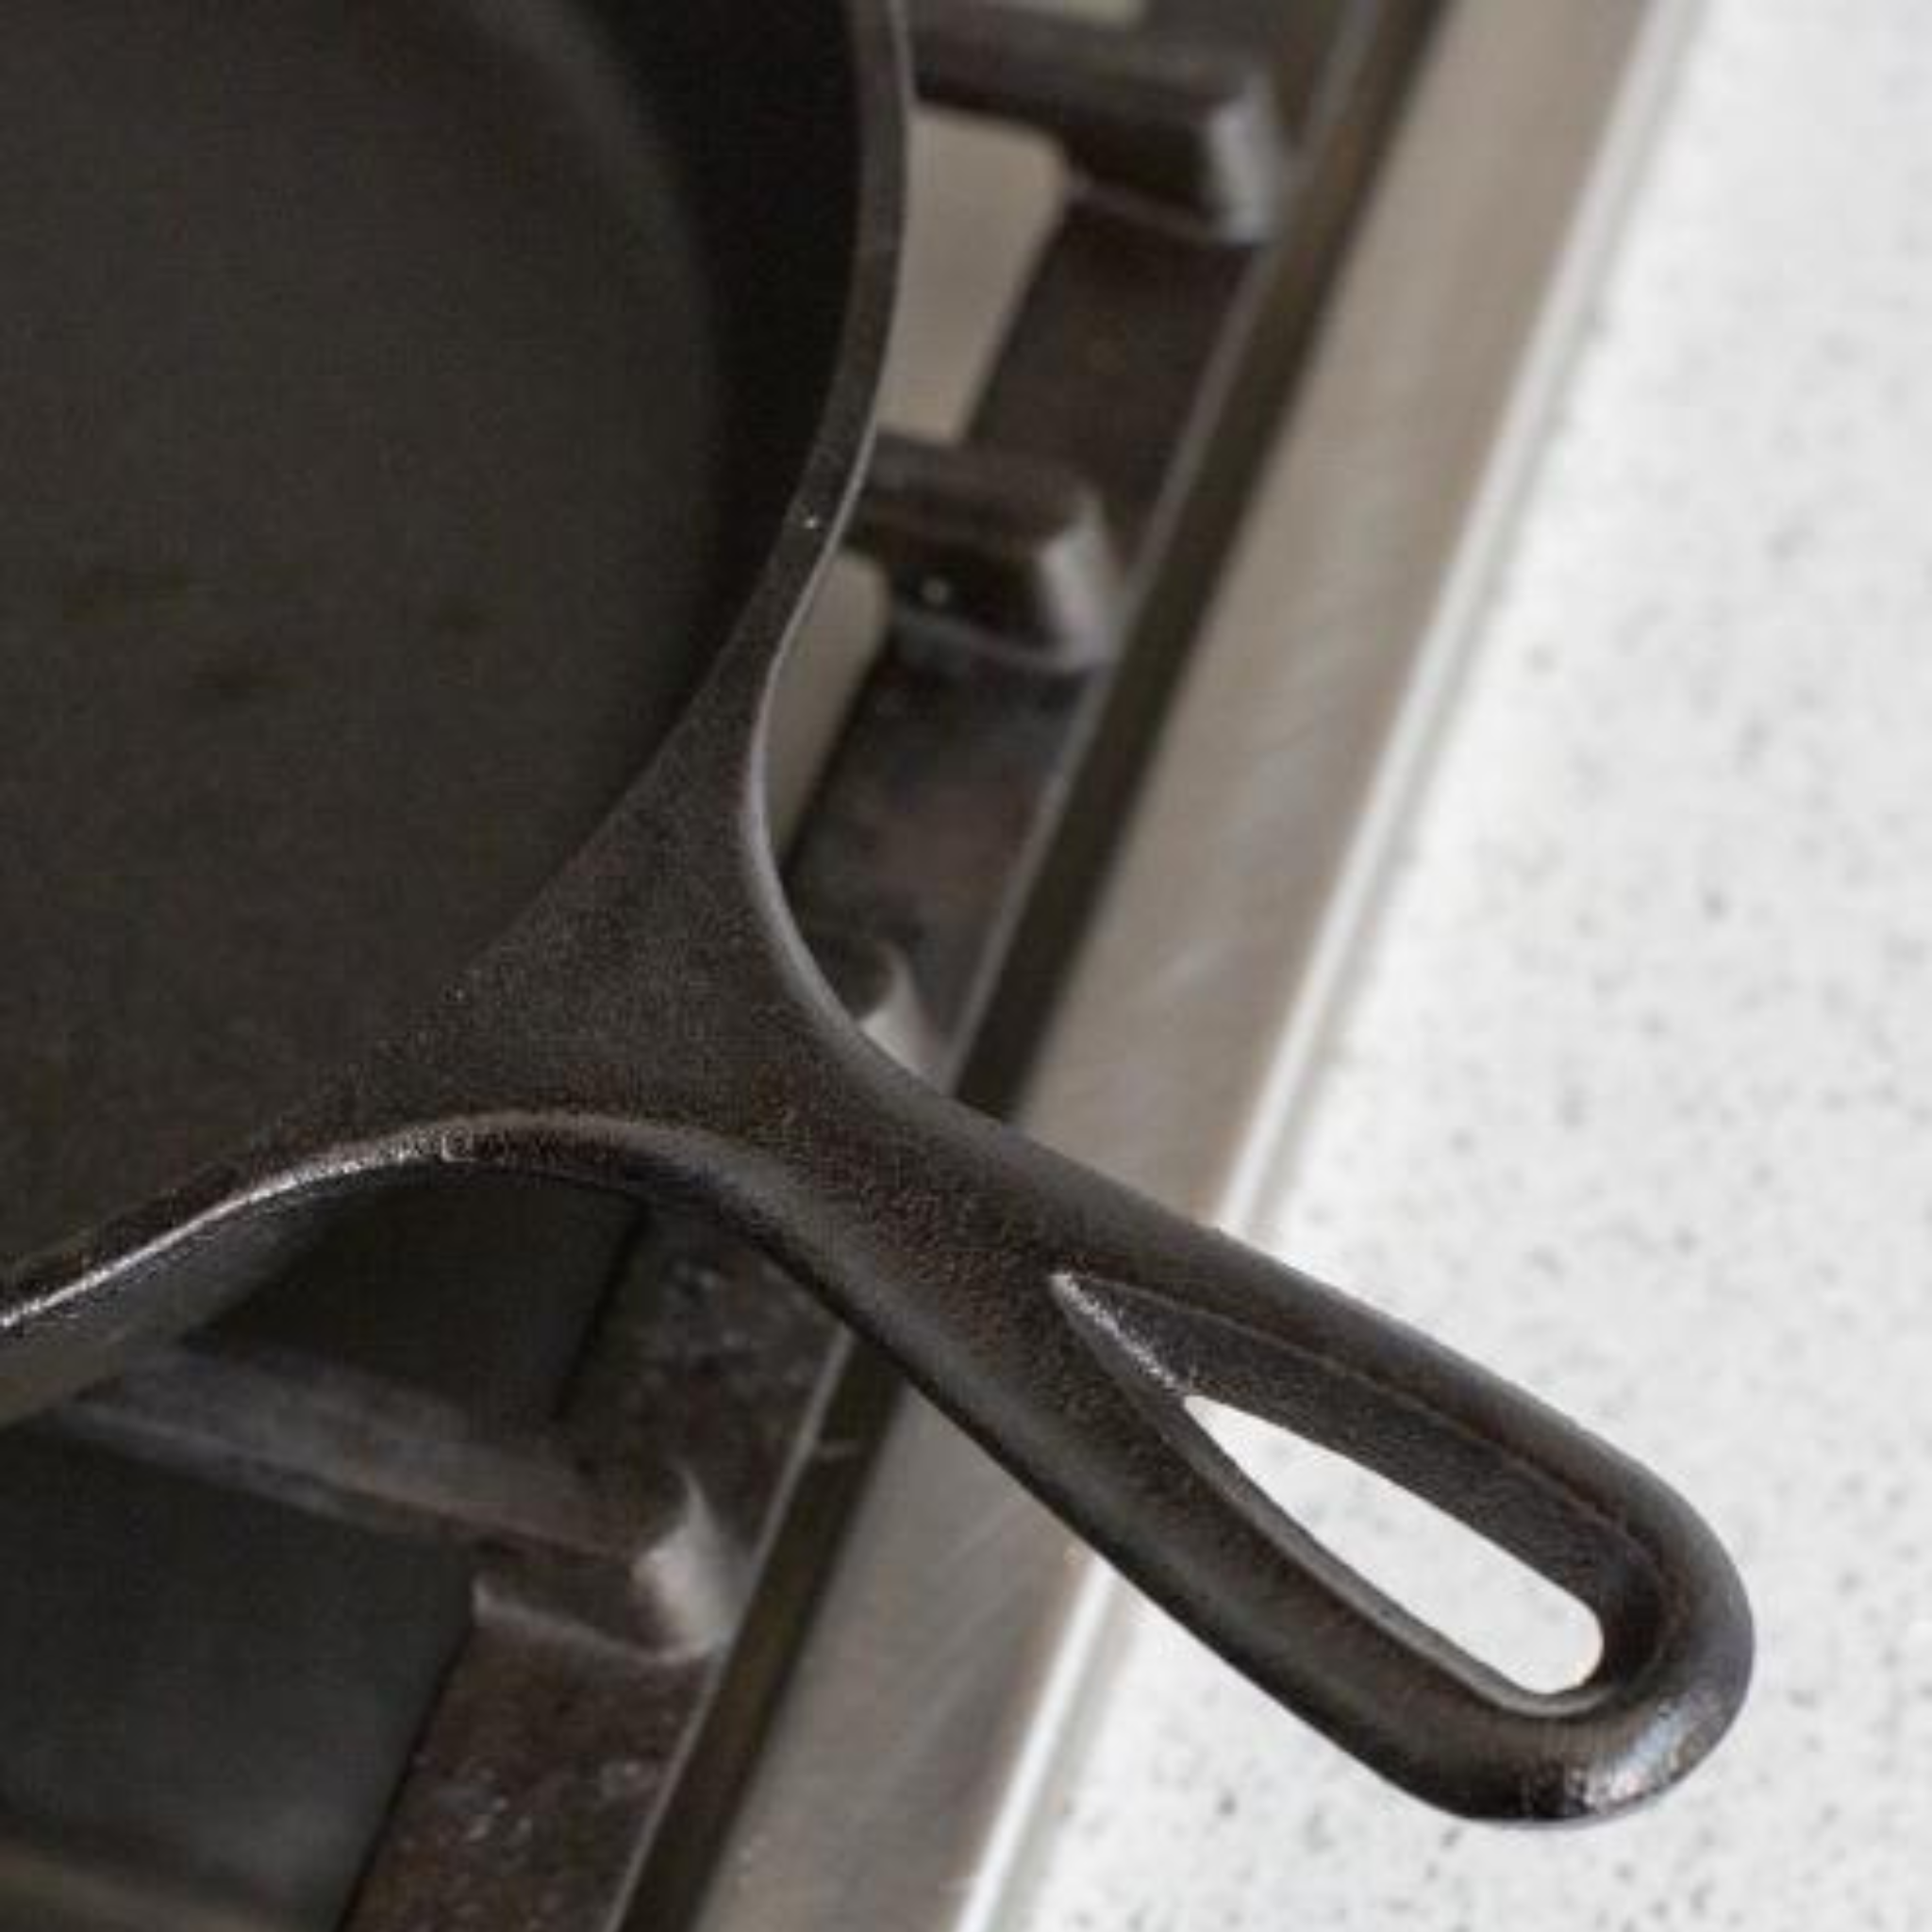 How to Season Cast Iron Cookware - Step by Step Instructions